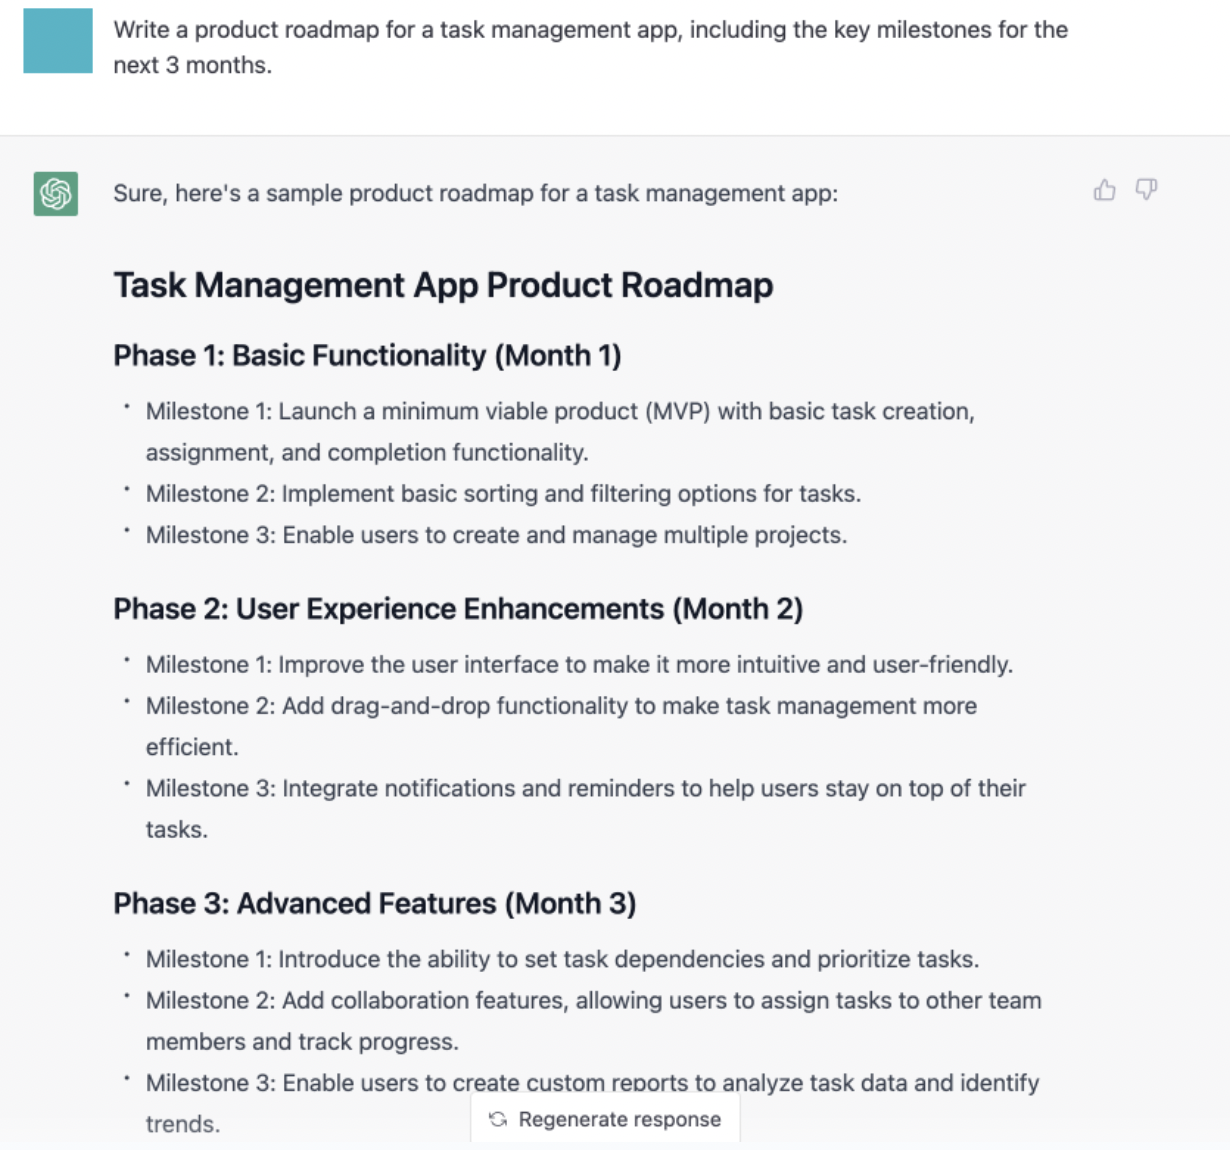 Use case with a prompt “Write a product roadmap for a task management app, including the key milestones for the next 3 months”.